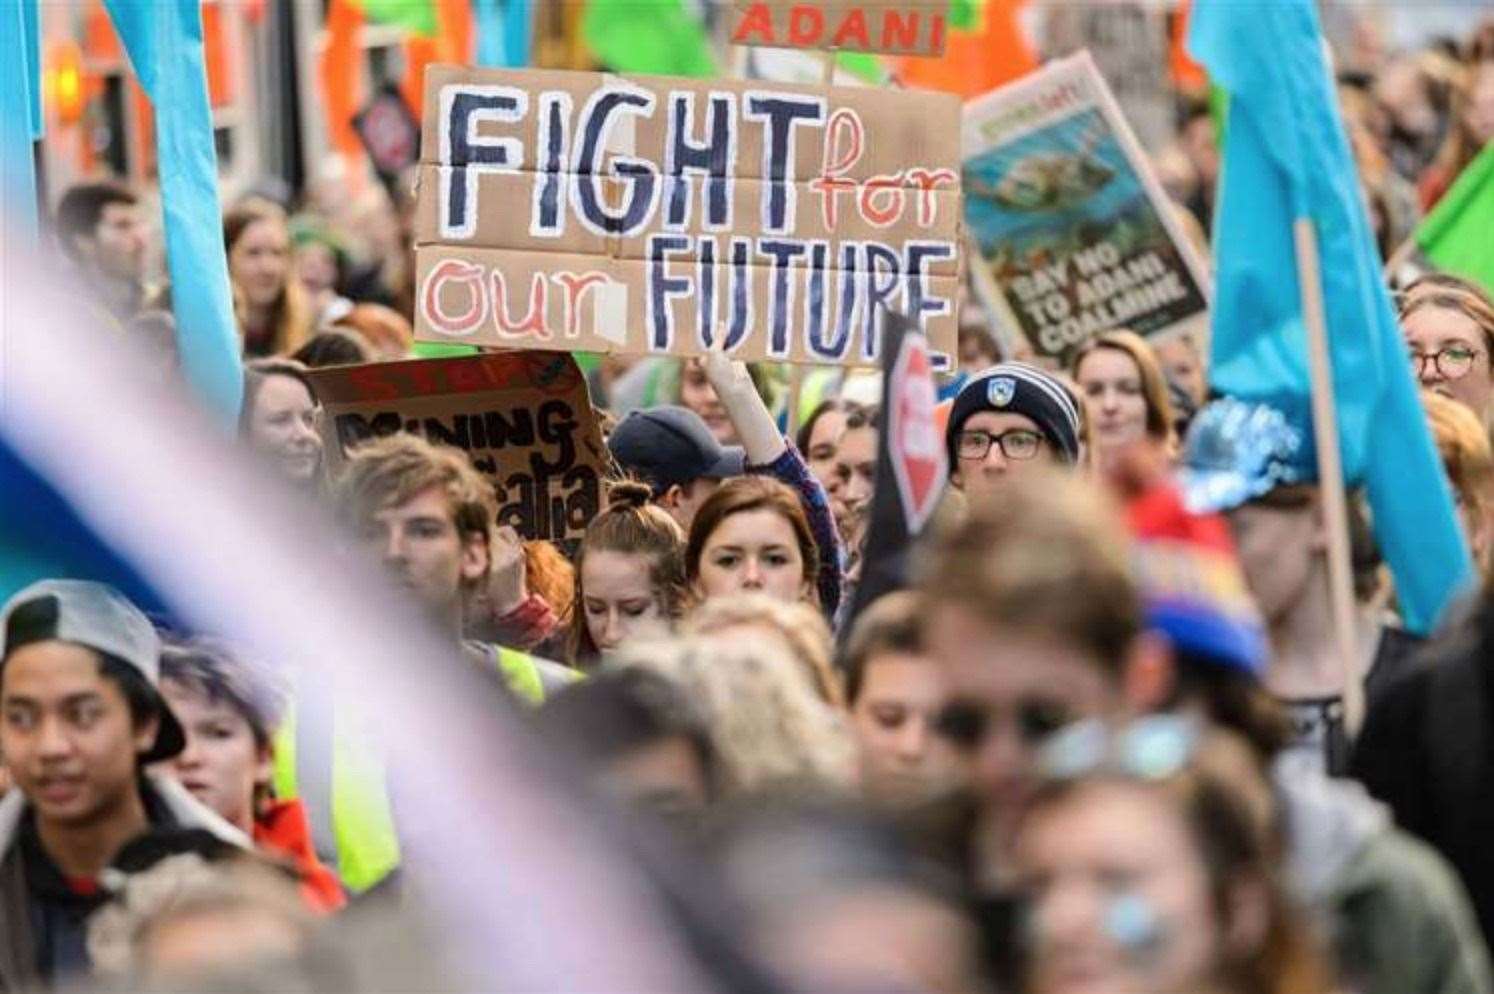 Protests have taken place across the country calling for action over climate change